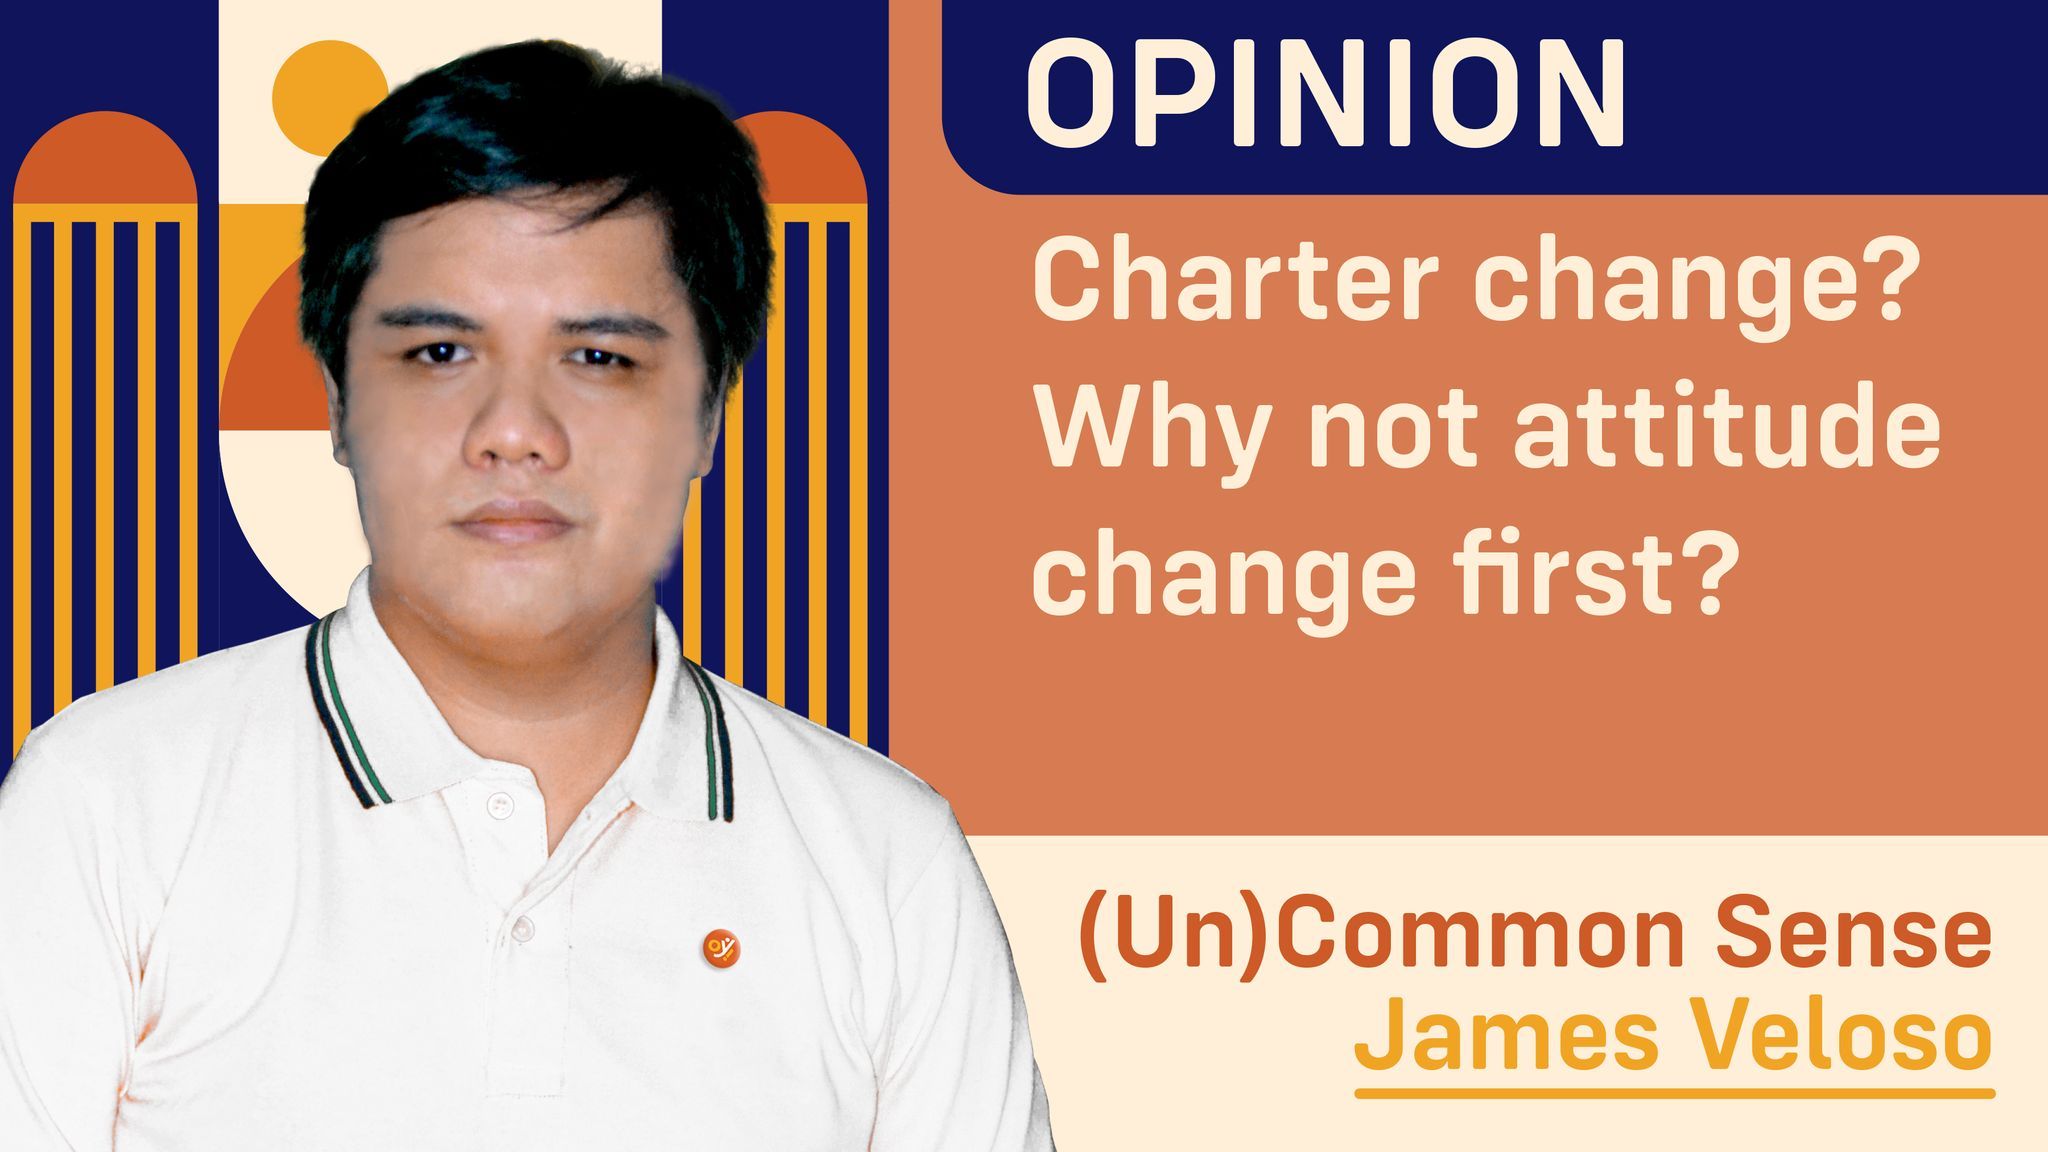 Charter change why not attitude change first